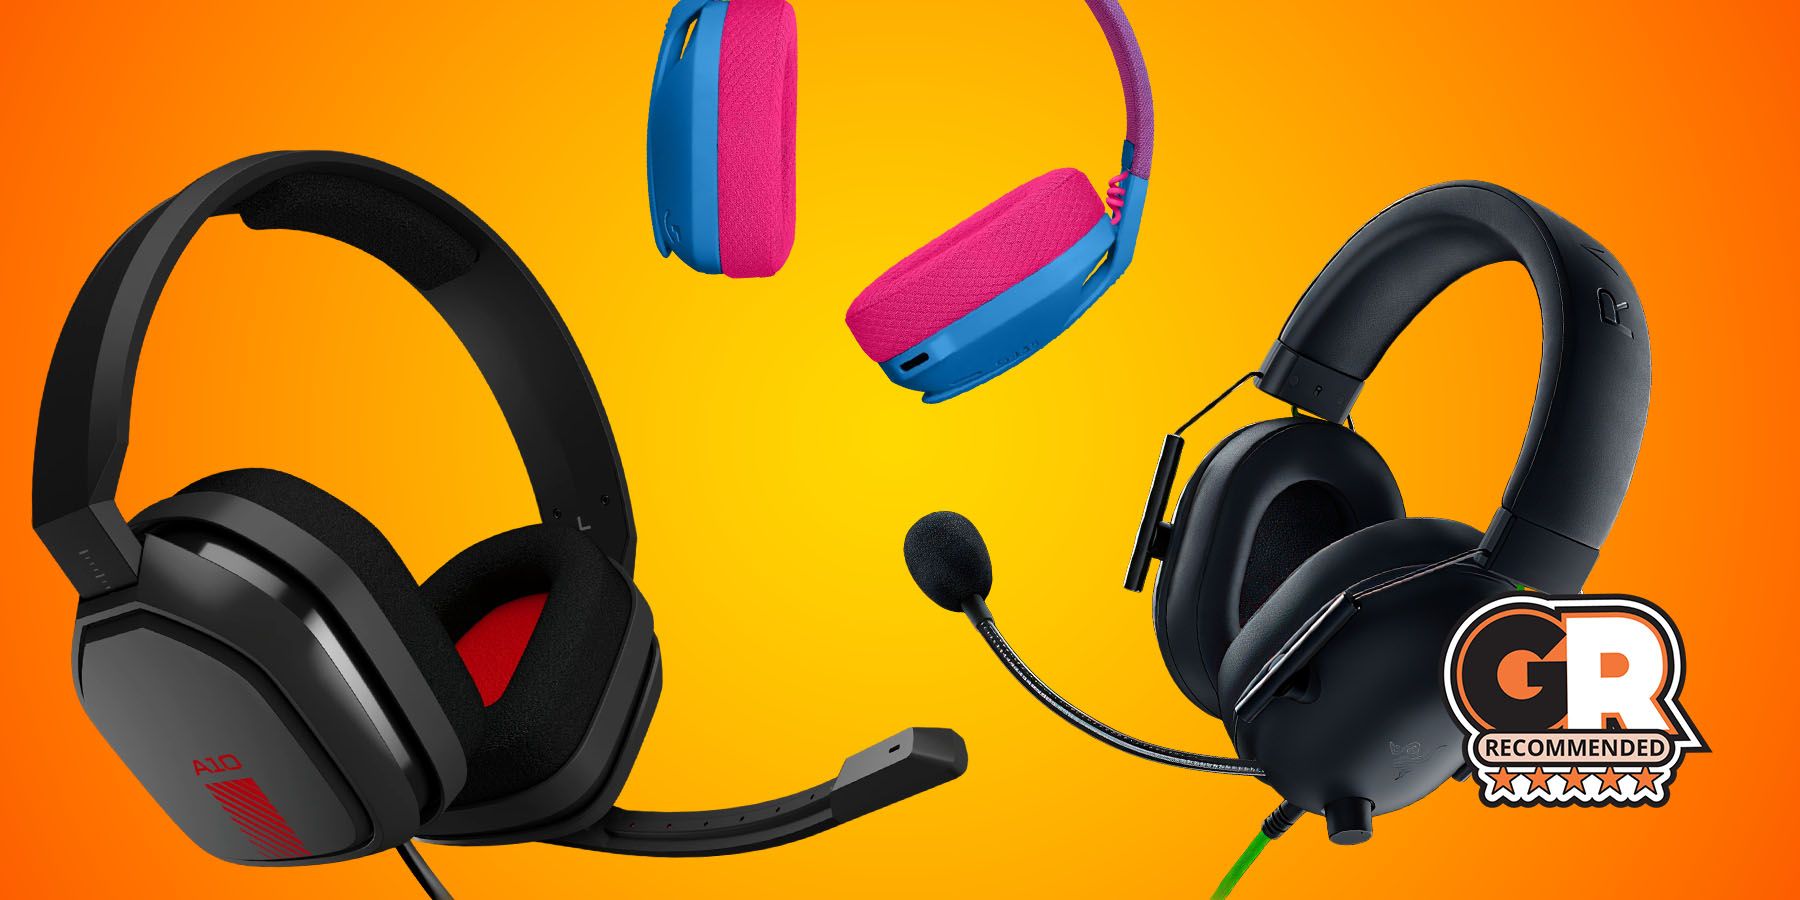 Logitech G435 Gaming Headset Review: Too Cheap to Be Good